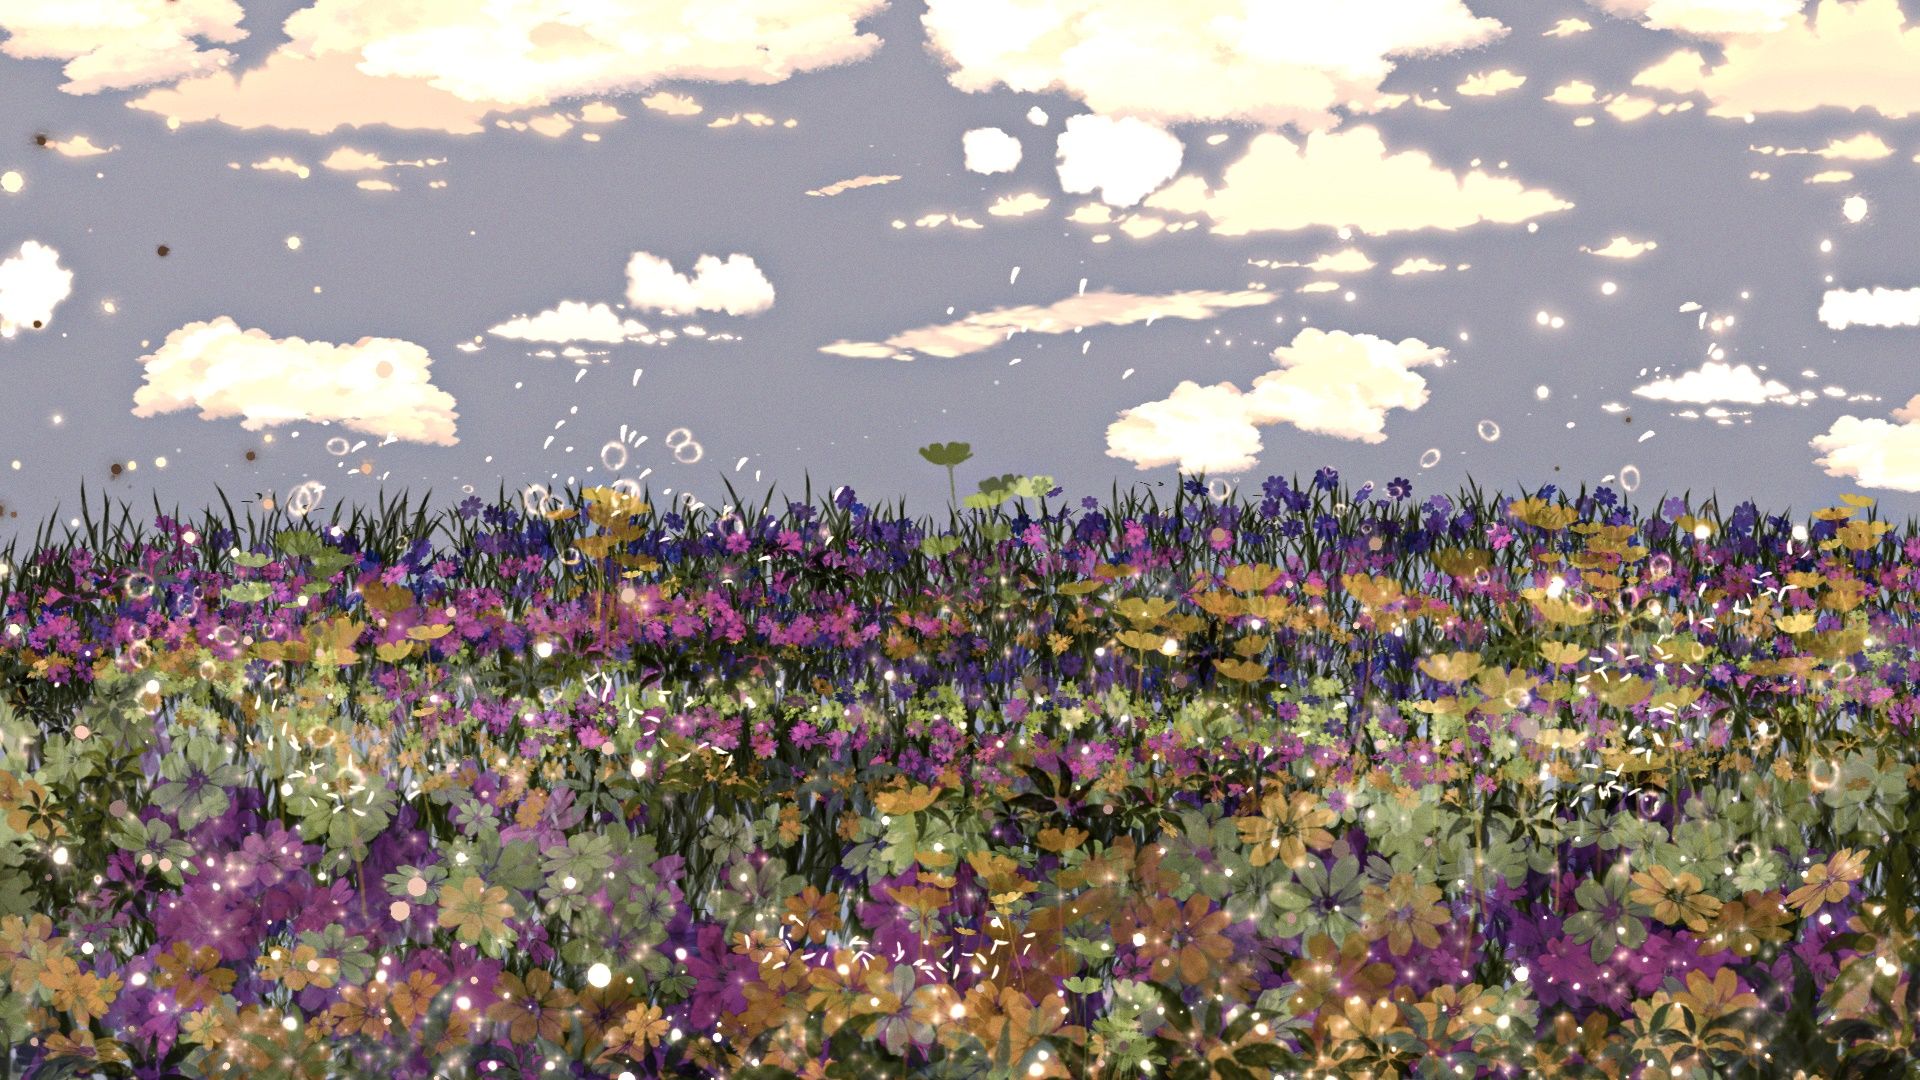 A painting of flowers and clouds in the sky - Nature, anime, 1920x1080, desktop